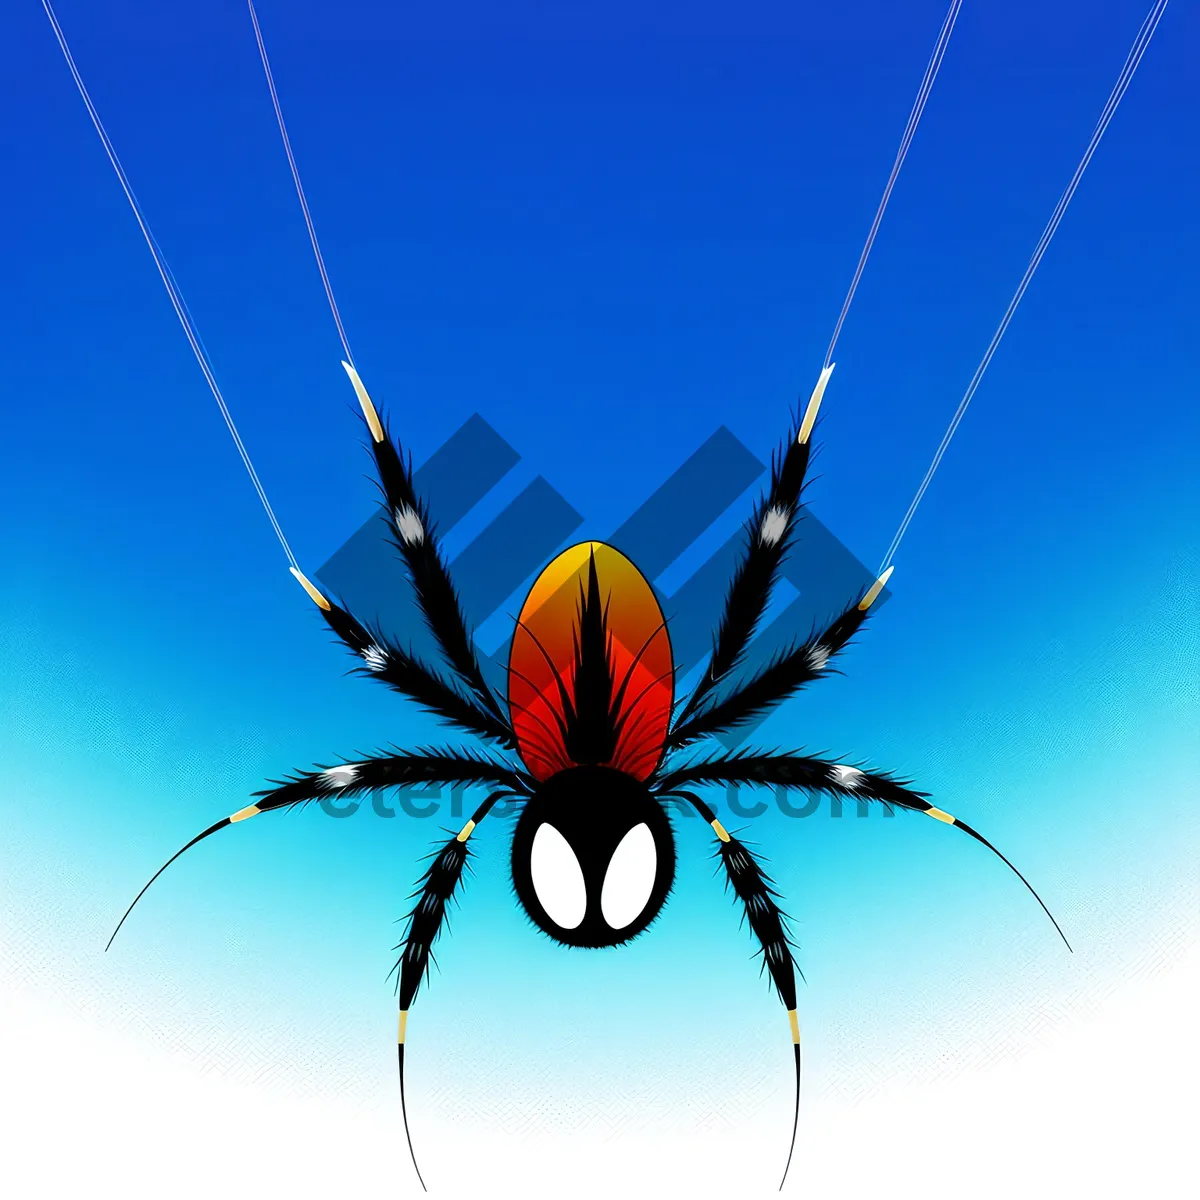 Picture of Spider on Floral Web with Rescue Parachute